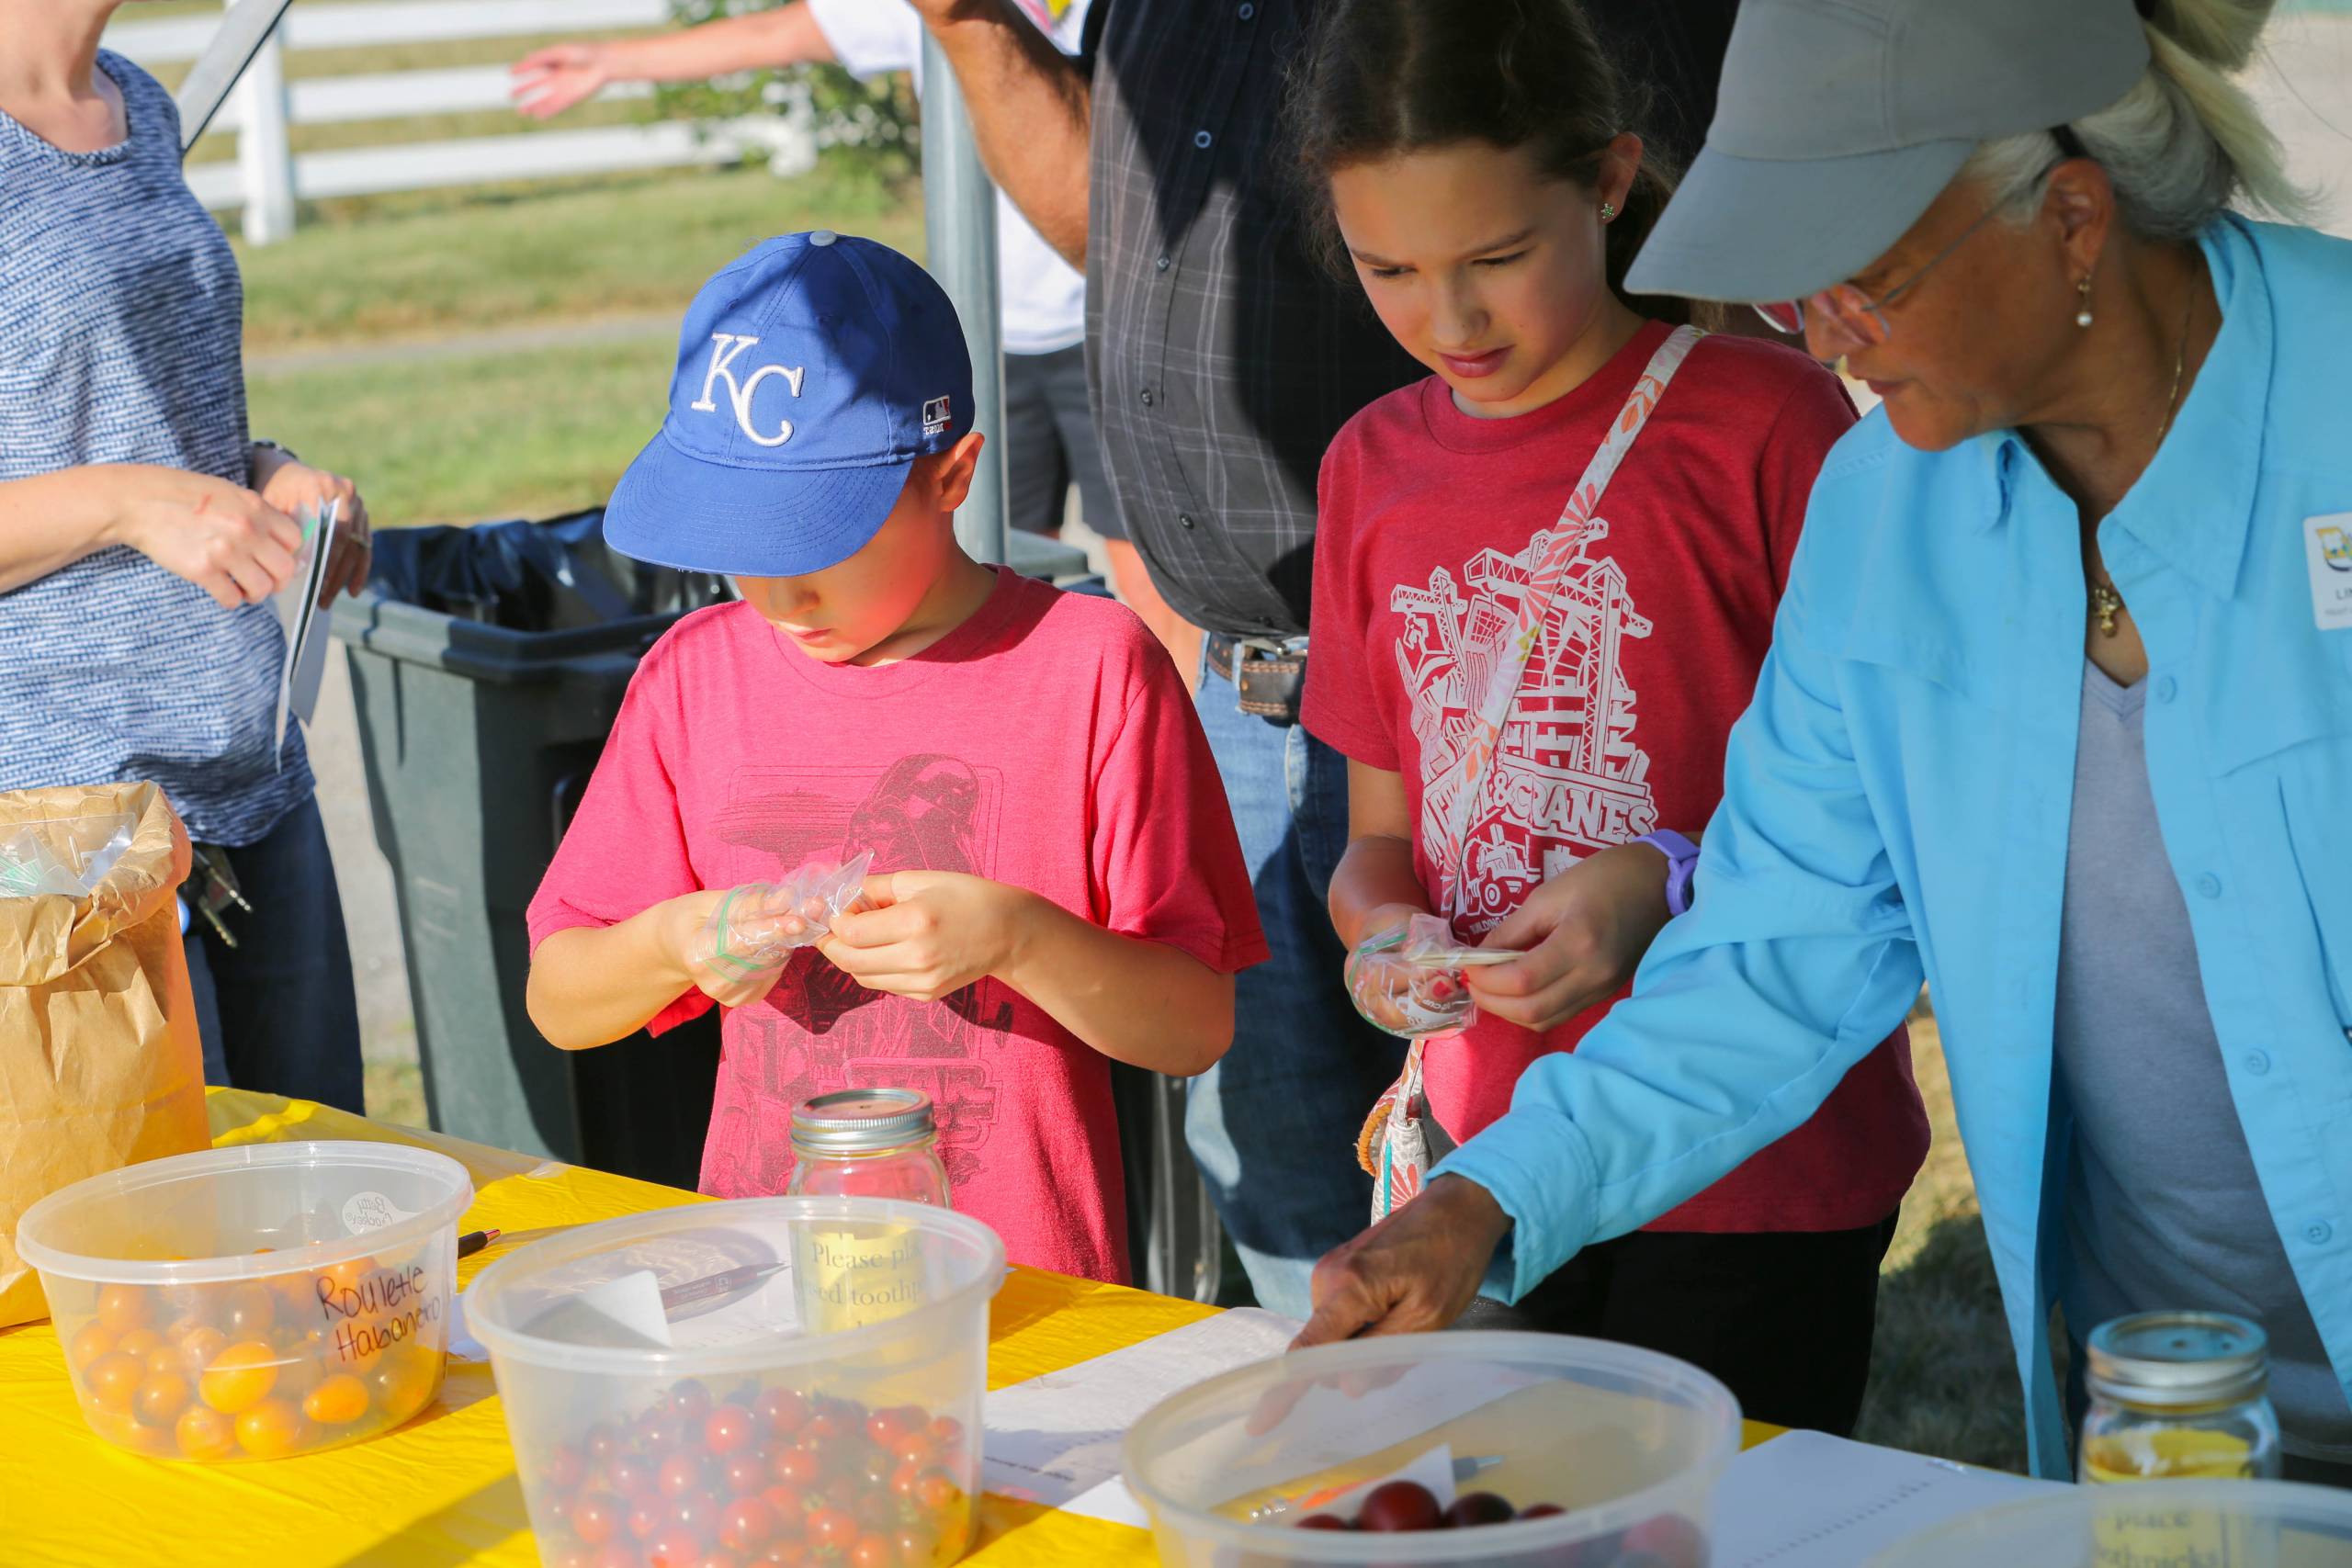 Science Night at Jefferson Farm and Garden (click to read)